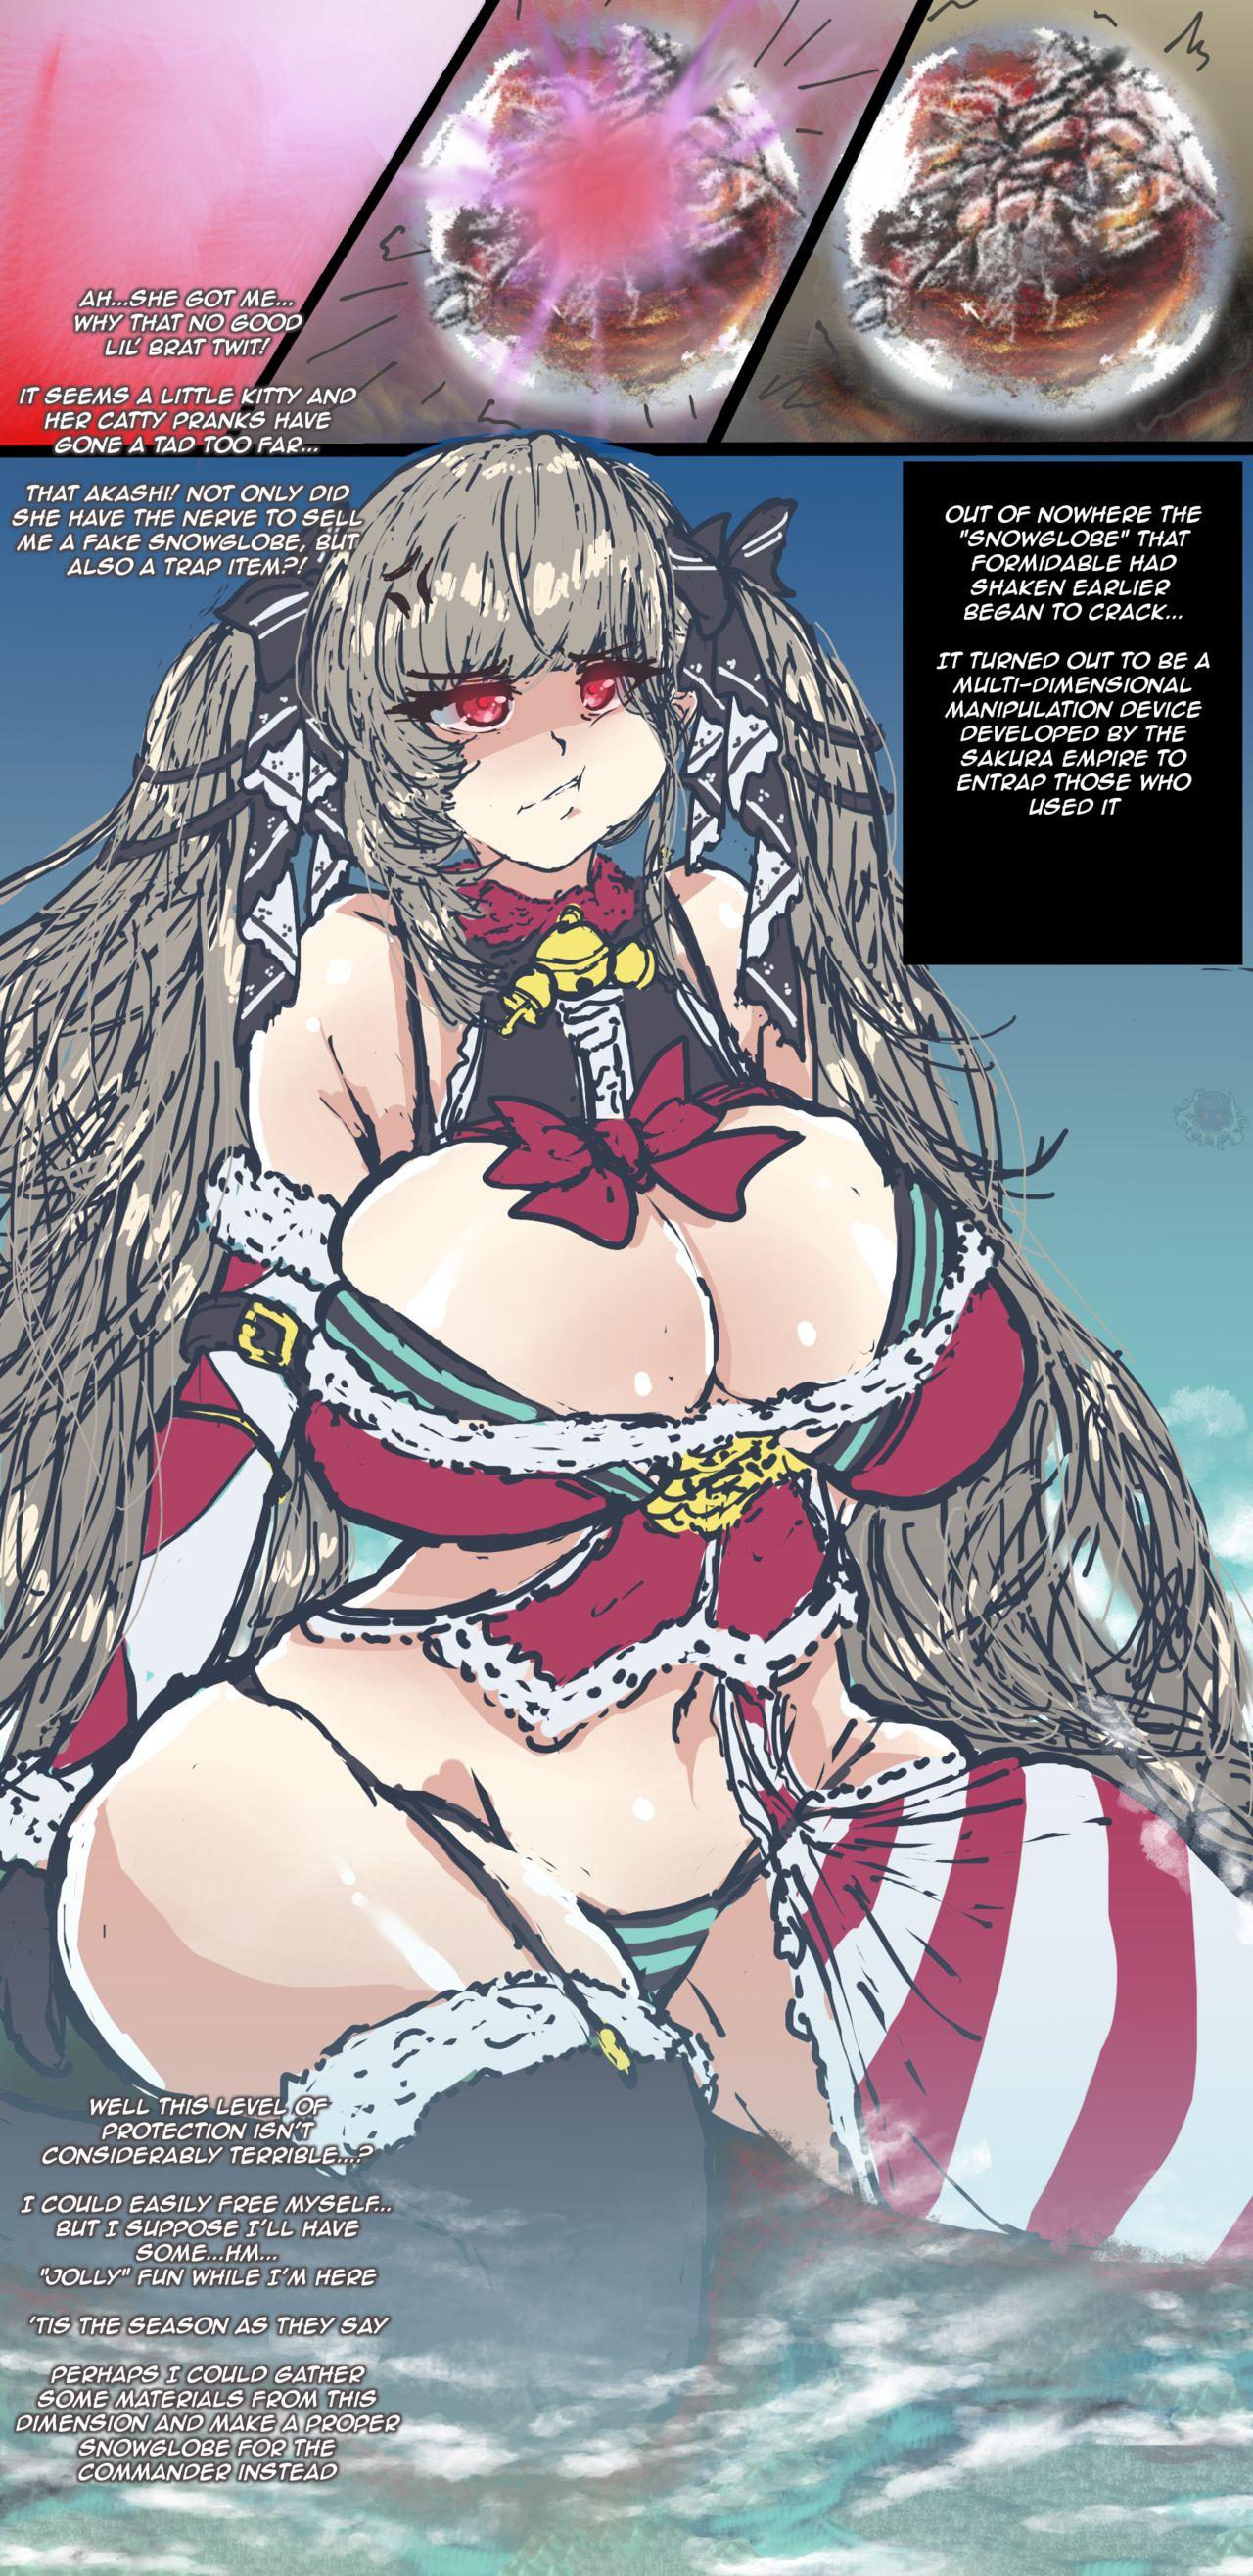 Star Merry Formidable Christmas - Azur lane Bedroom - Page 4